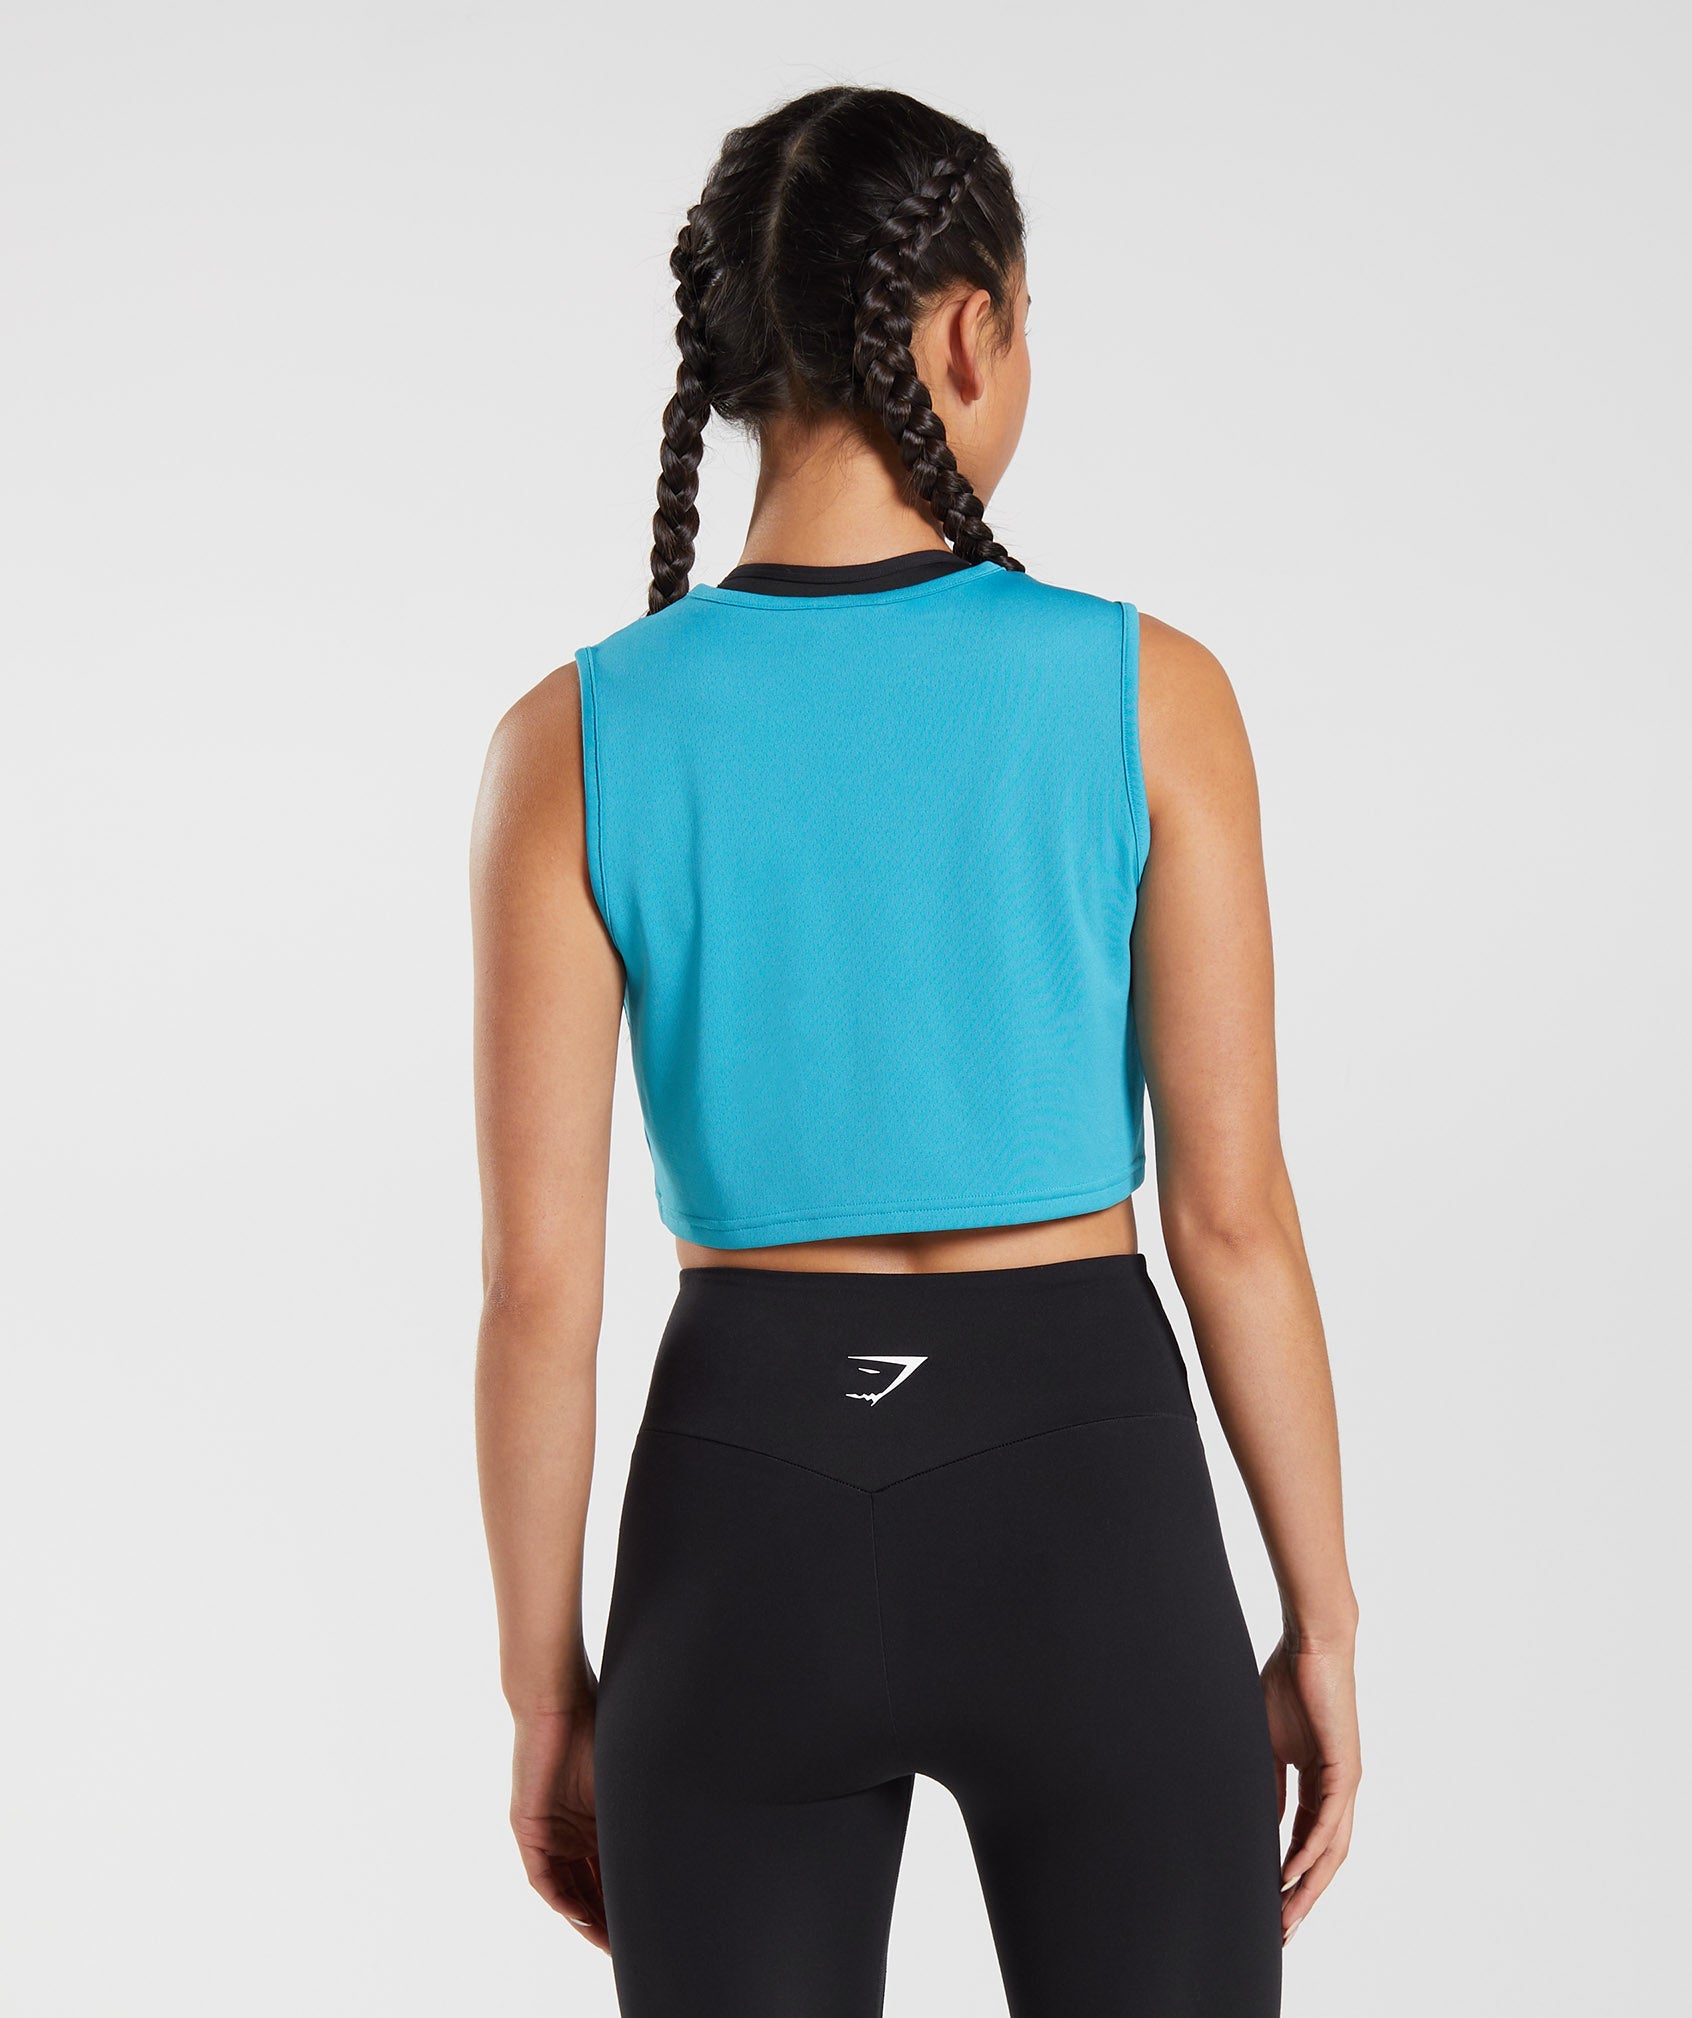 Gym Tops & Gym T-Shirts for Women - Gymshark